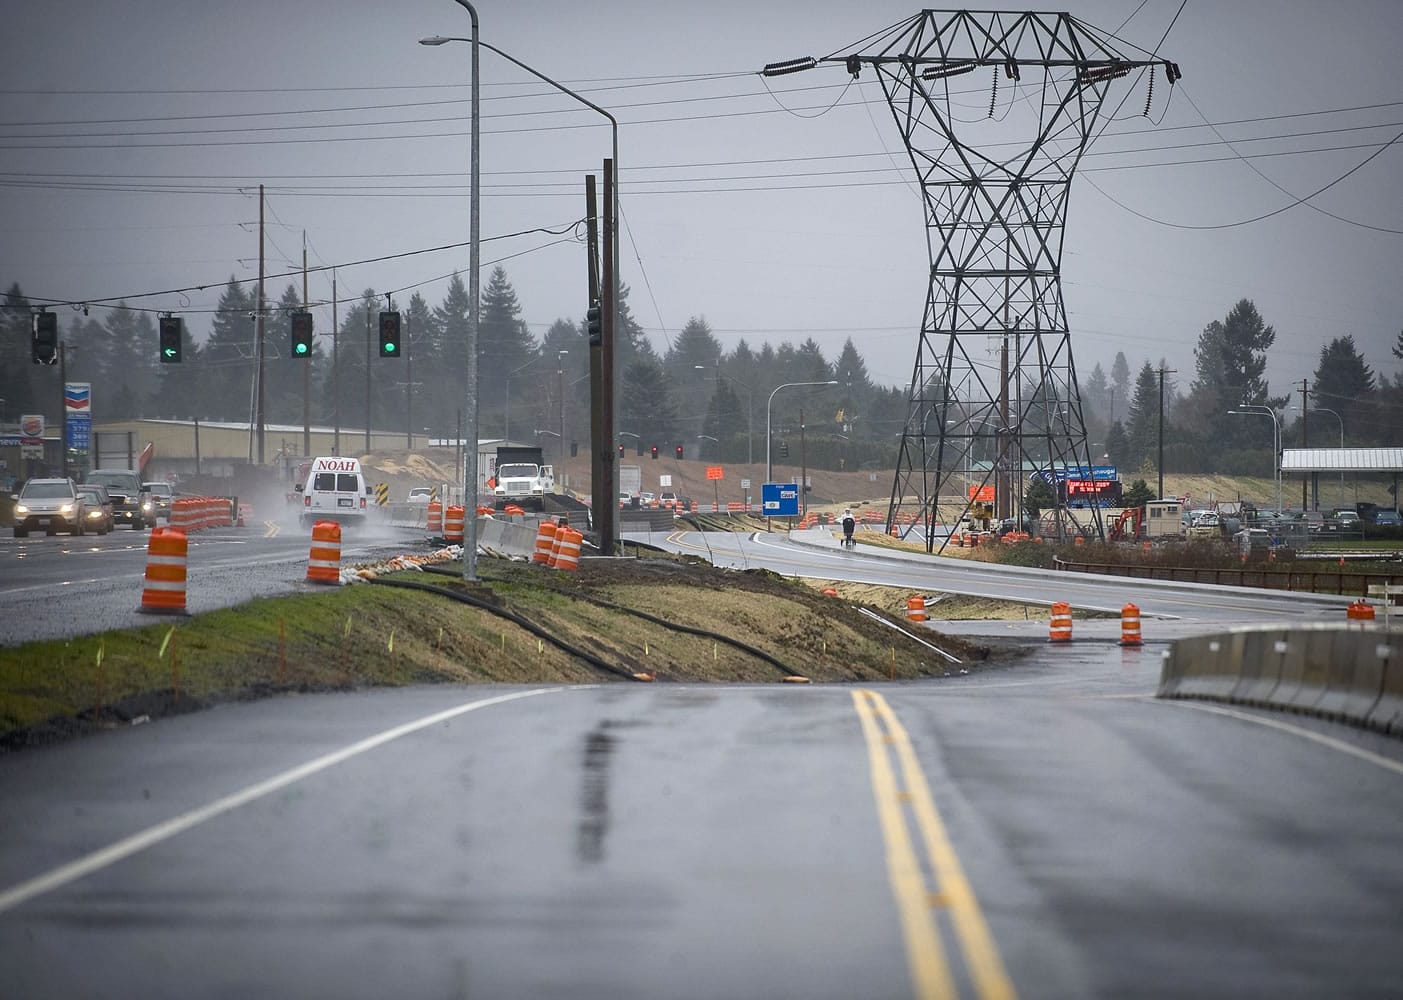 Starting next month, traffic on state Highway 14 will be diverted onto a new frontage road to the south as crews close a section of the highway near Camas and Washougal.